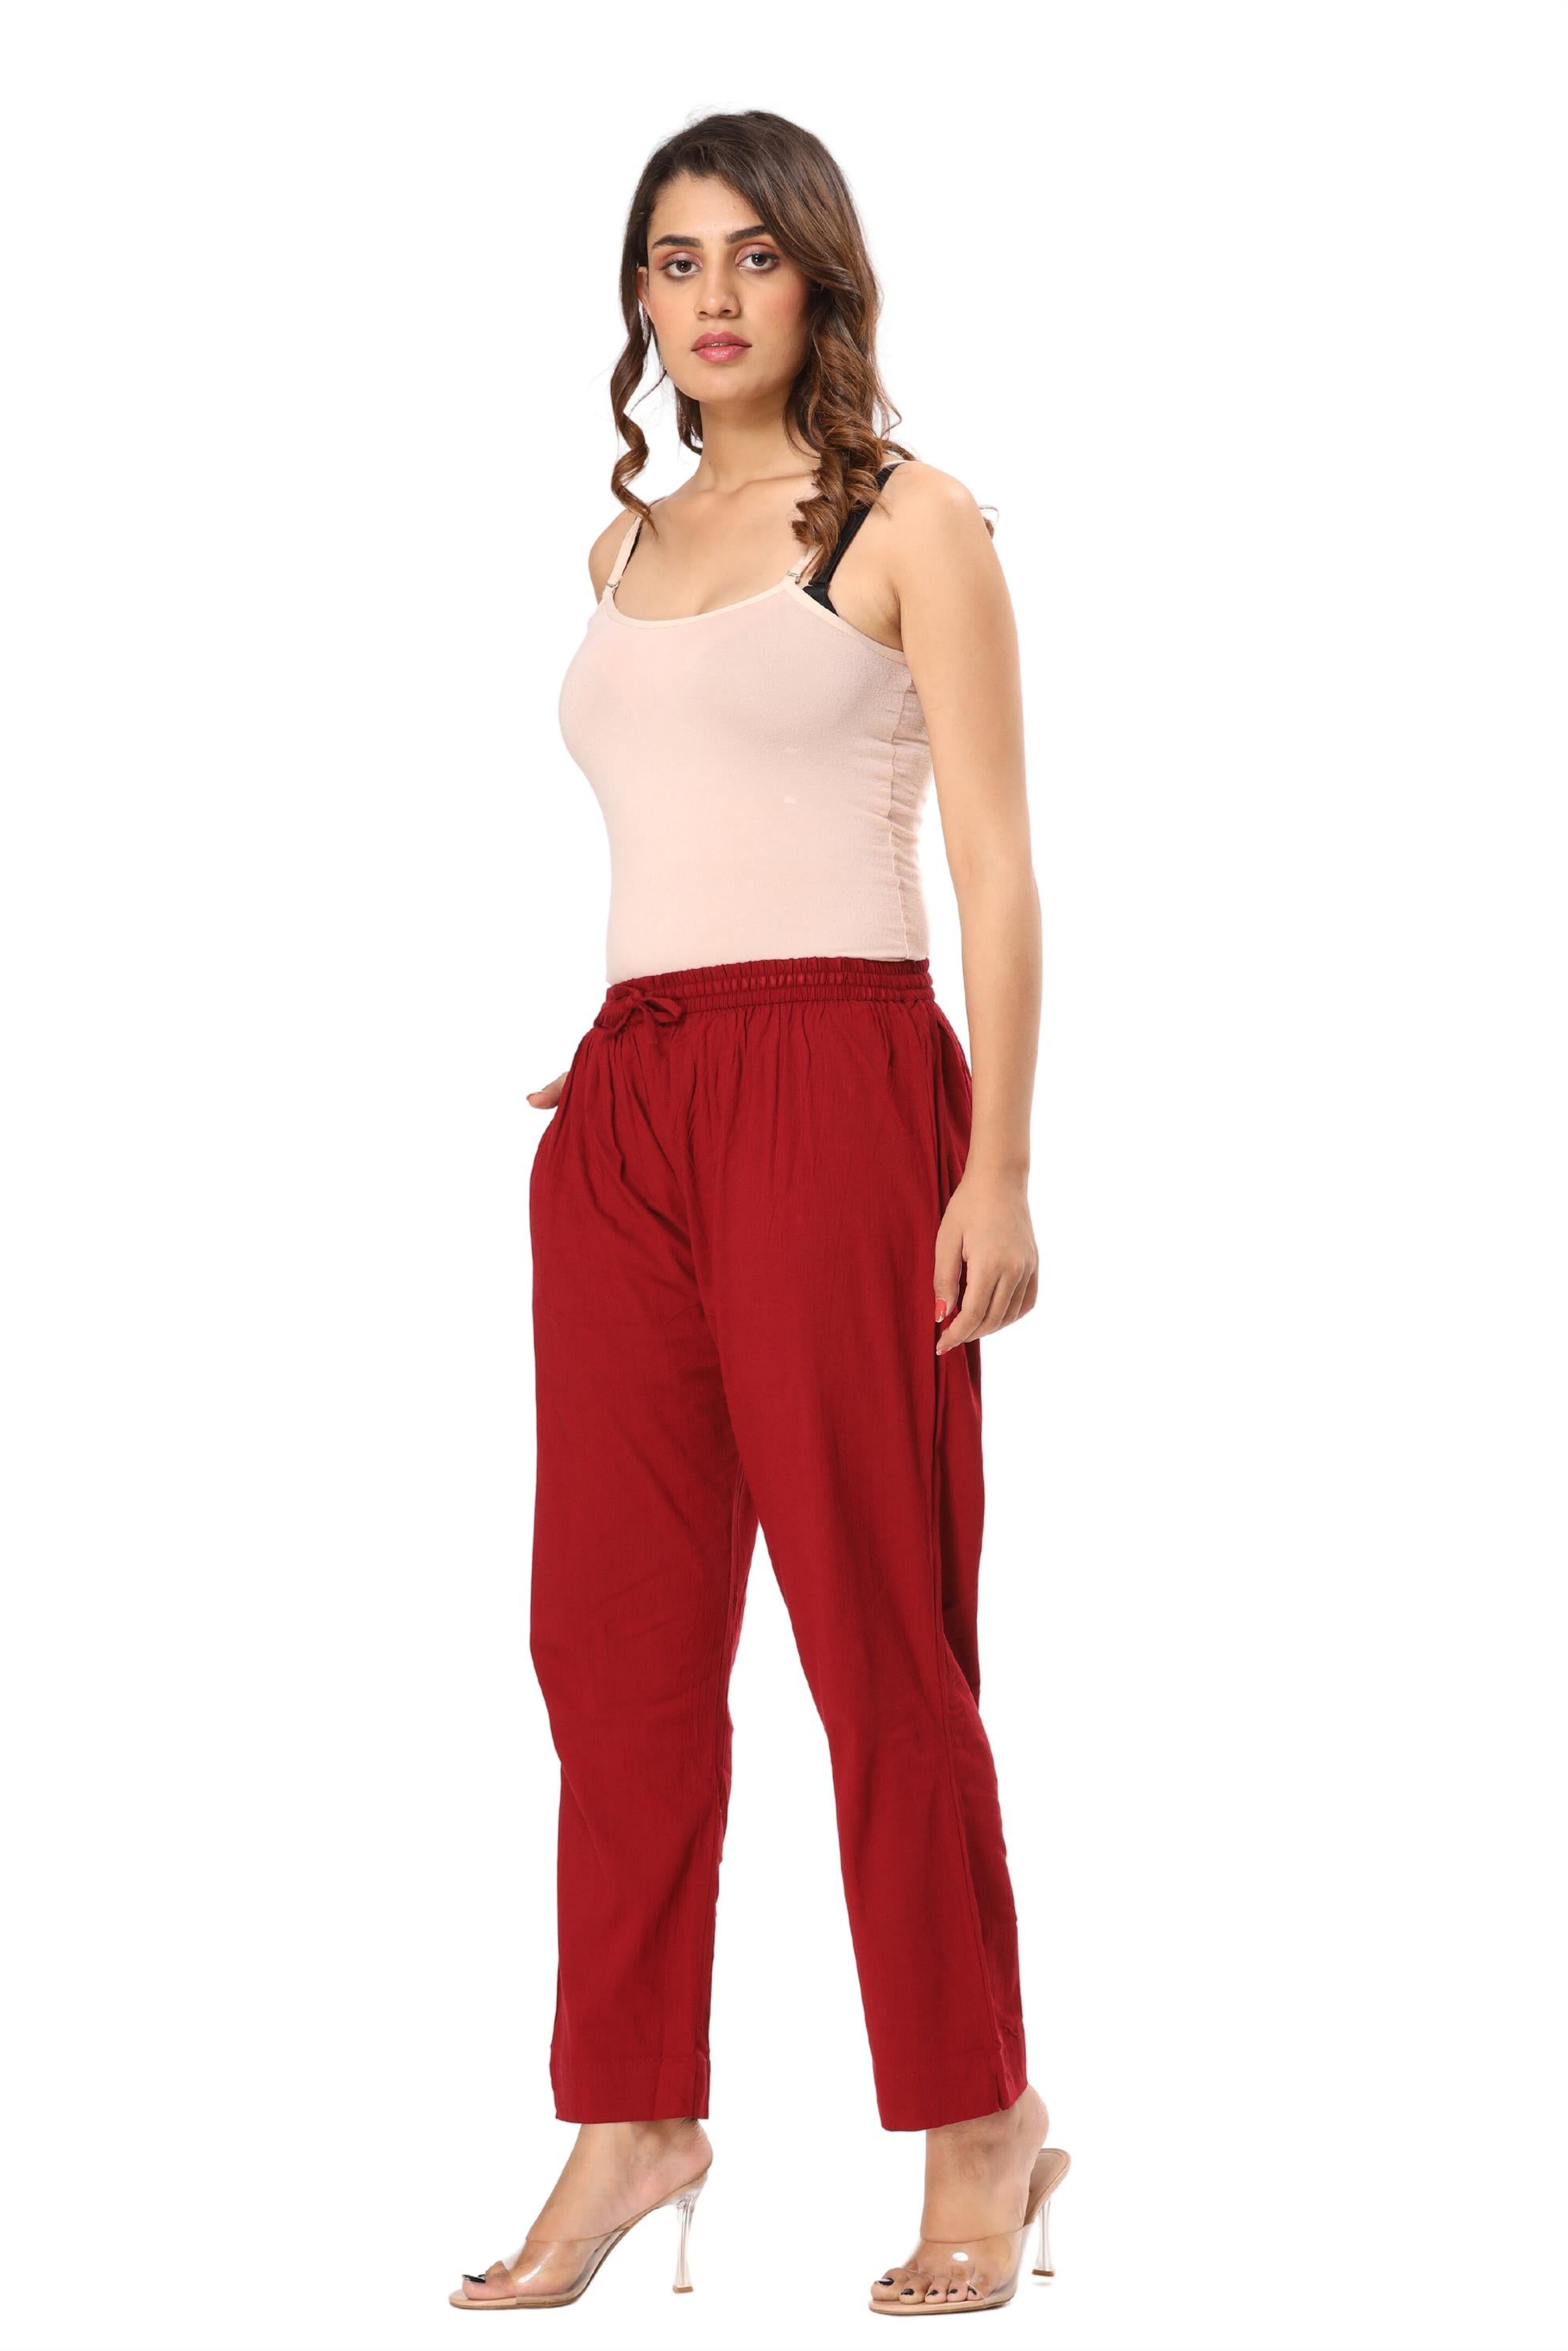 Buy Yellow Trippy Pant Cotton Lycra for Best Price, Reviews, Free Shipping